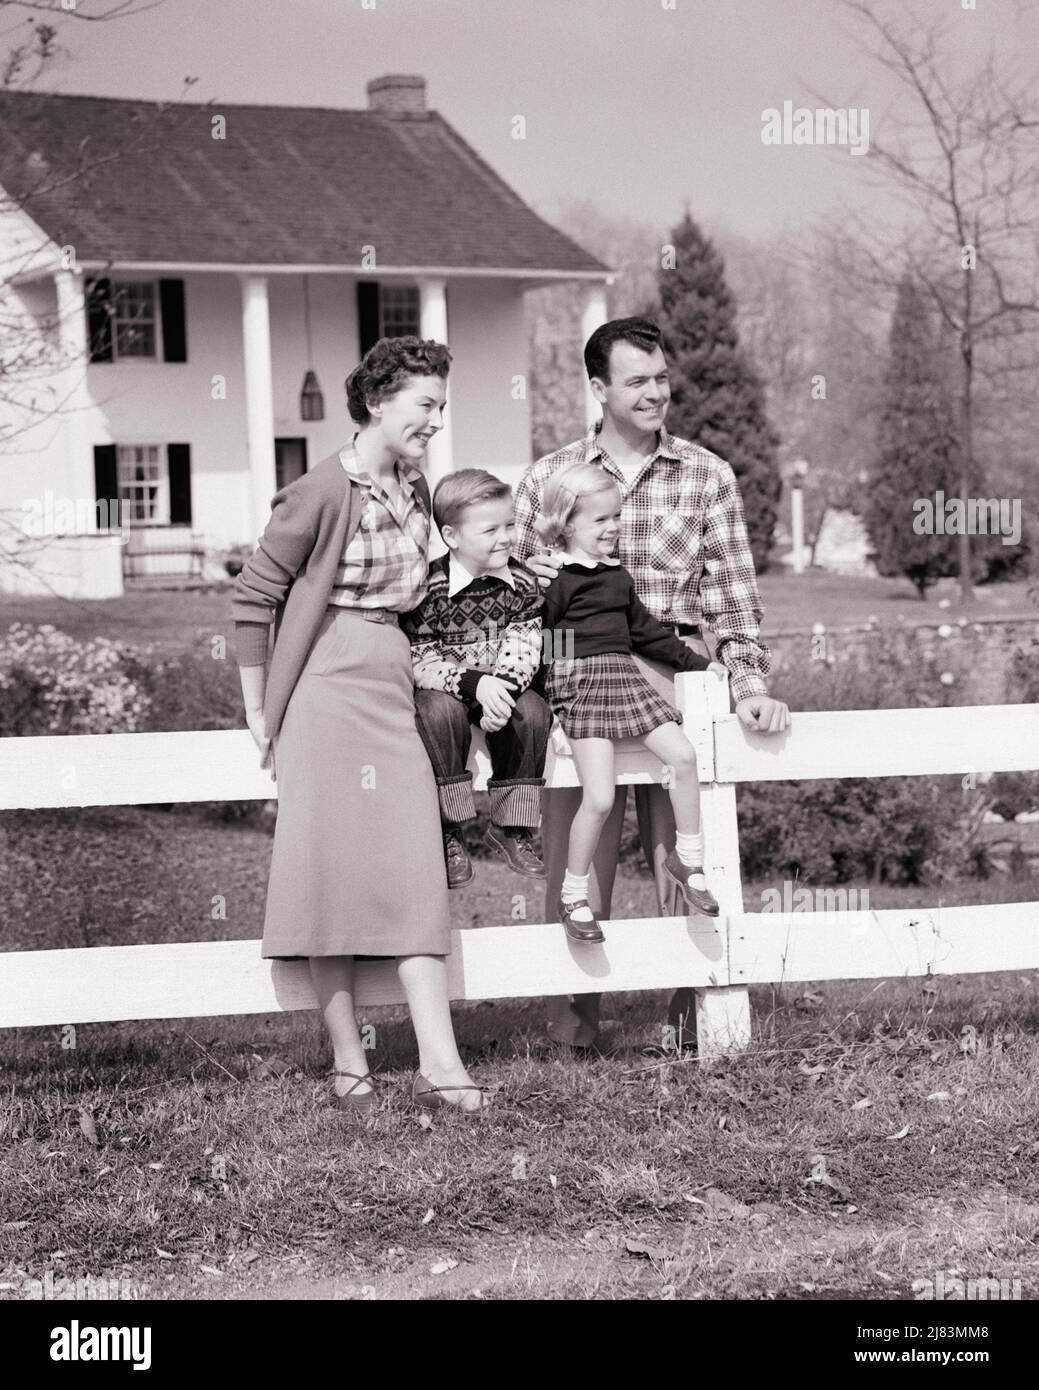 1950s FAMILY OF 4 BY WHITE FENCE IN FRONT OF TWO STORY HOUSE WITH COLUMNS BOY AND GIRL SITTING ON FENCE PARENTS STANDING - j3184 HAR001 HARS STORY NOSTALGIC PAIR 4 SUBURBAN SPRING MOTHERS OLD TIME NOSTALGIA BROTHER OLD FASHION SISTER JUVENILE STYLE WELCOME YOUNG ADULT ABSTRACT PLEASED FAMILIES JOY LIFESTYLE FEMALES HOUSES MARRIED BROTHERS SPOUSE HUSBANDS HEALTHINESS HOME LIFE COPY SPACE FRIENDSHIP FULL-LENGTH LADIES PERSONS RESIDENTIAL CARING MALES BUILDINGS SIBLINGS SISTERS FATHERS B&W PARTNER DREAMS HAPPINESS CHEERFUL AND DADS EXTERIOR PRIDE COLUMNS HOMES SIBLING SMILES CONNECTION JOYFUL Stock Photo